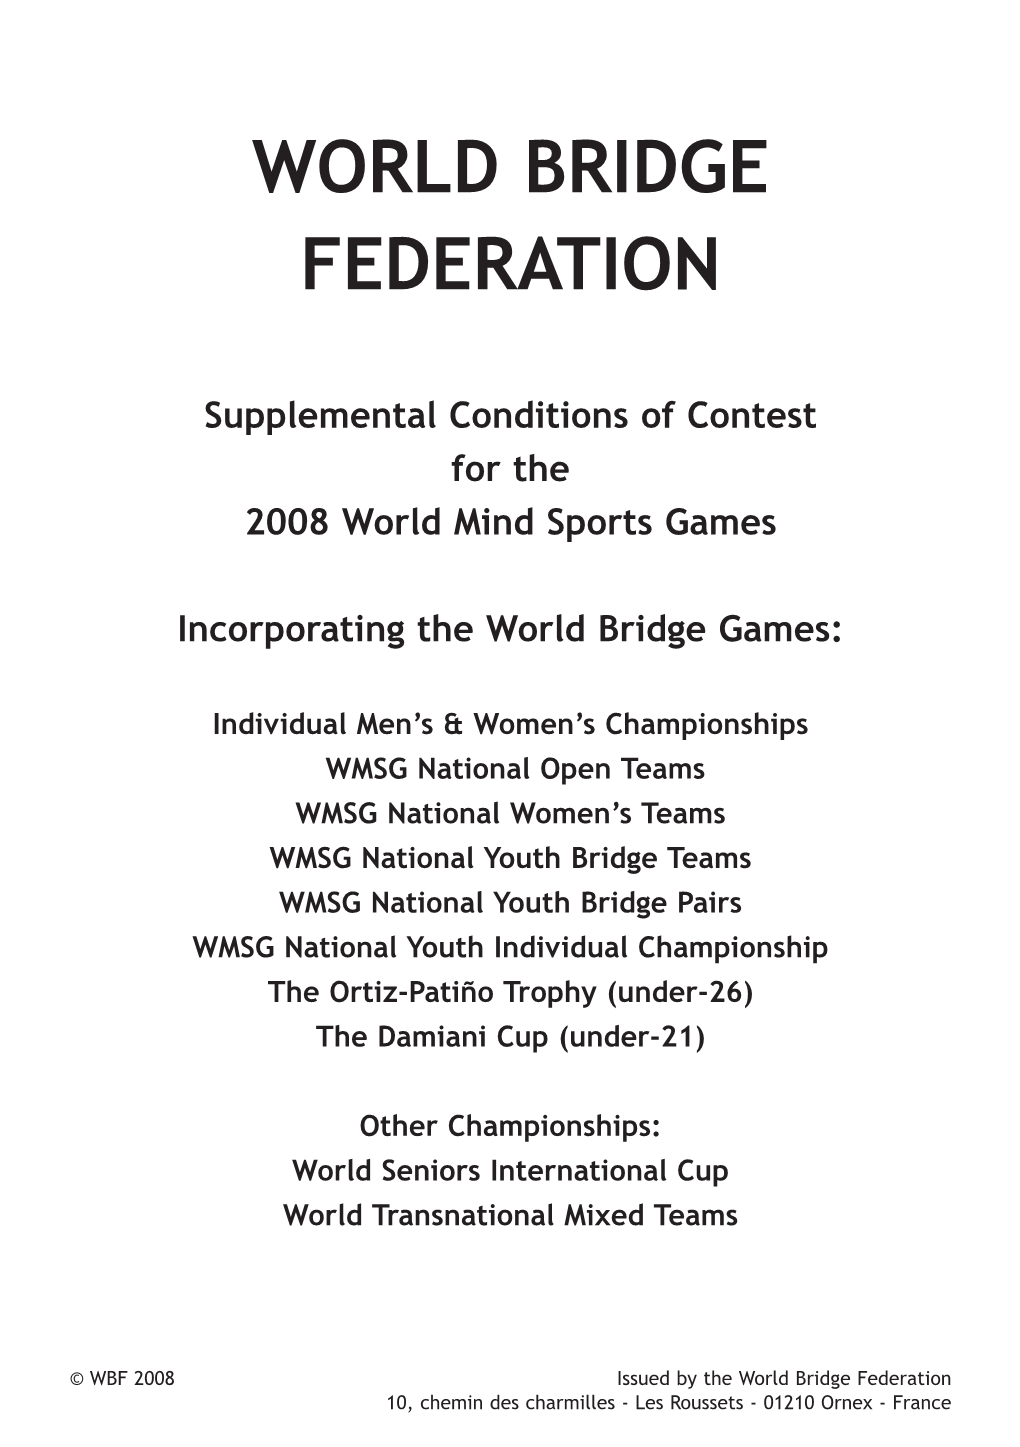 Supplemental Conditions of Contest for the 2008 World Mind Sports Games